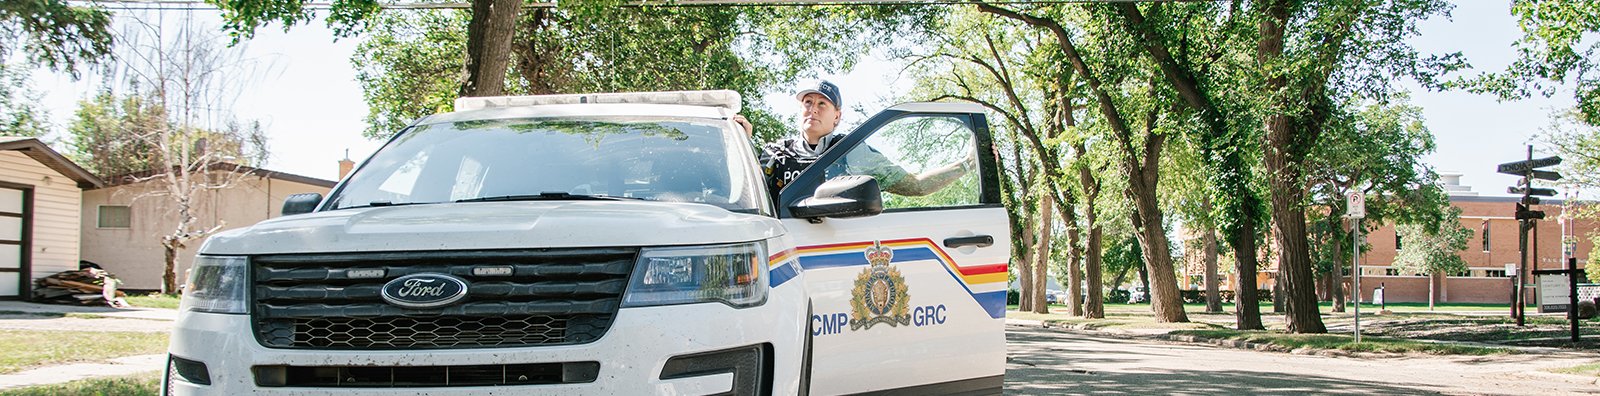 RCMP officer with RCMP vehicle